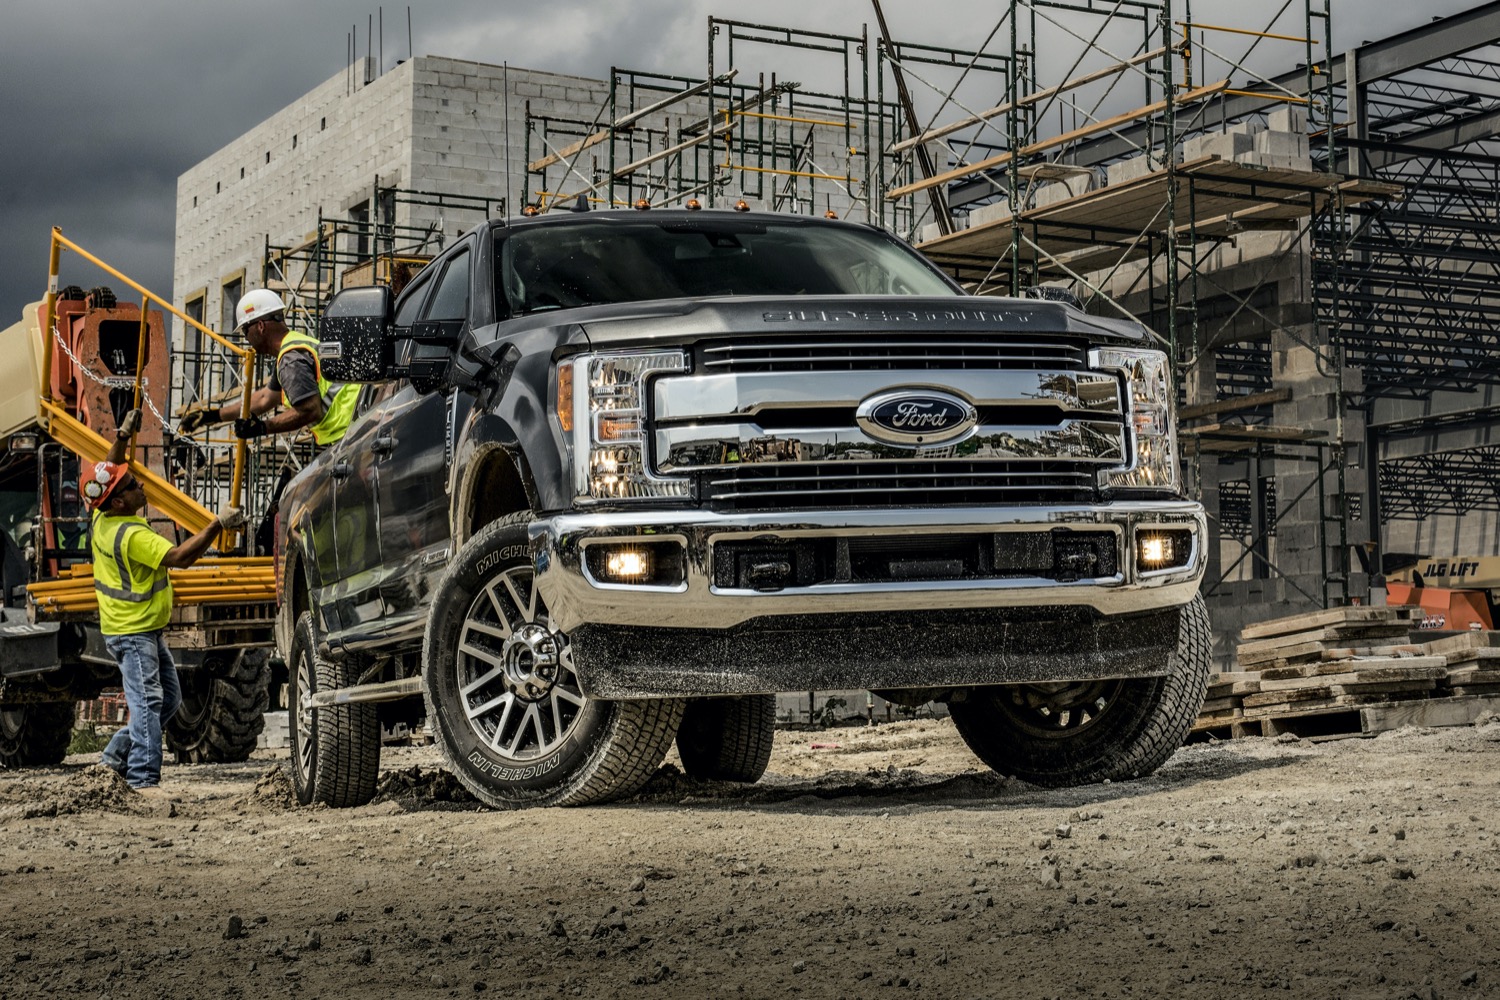 2019 Ford Super Duty Recalled Over Front Axle Issue